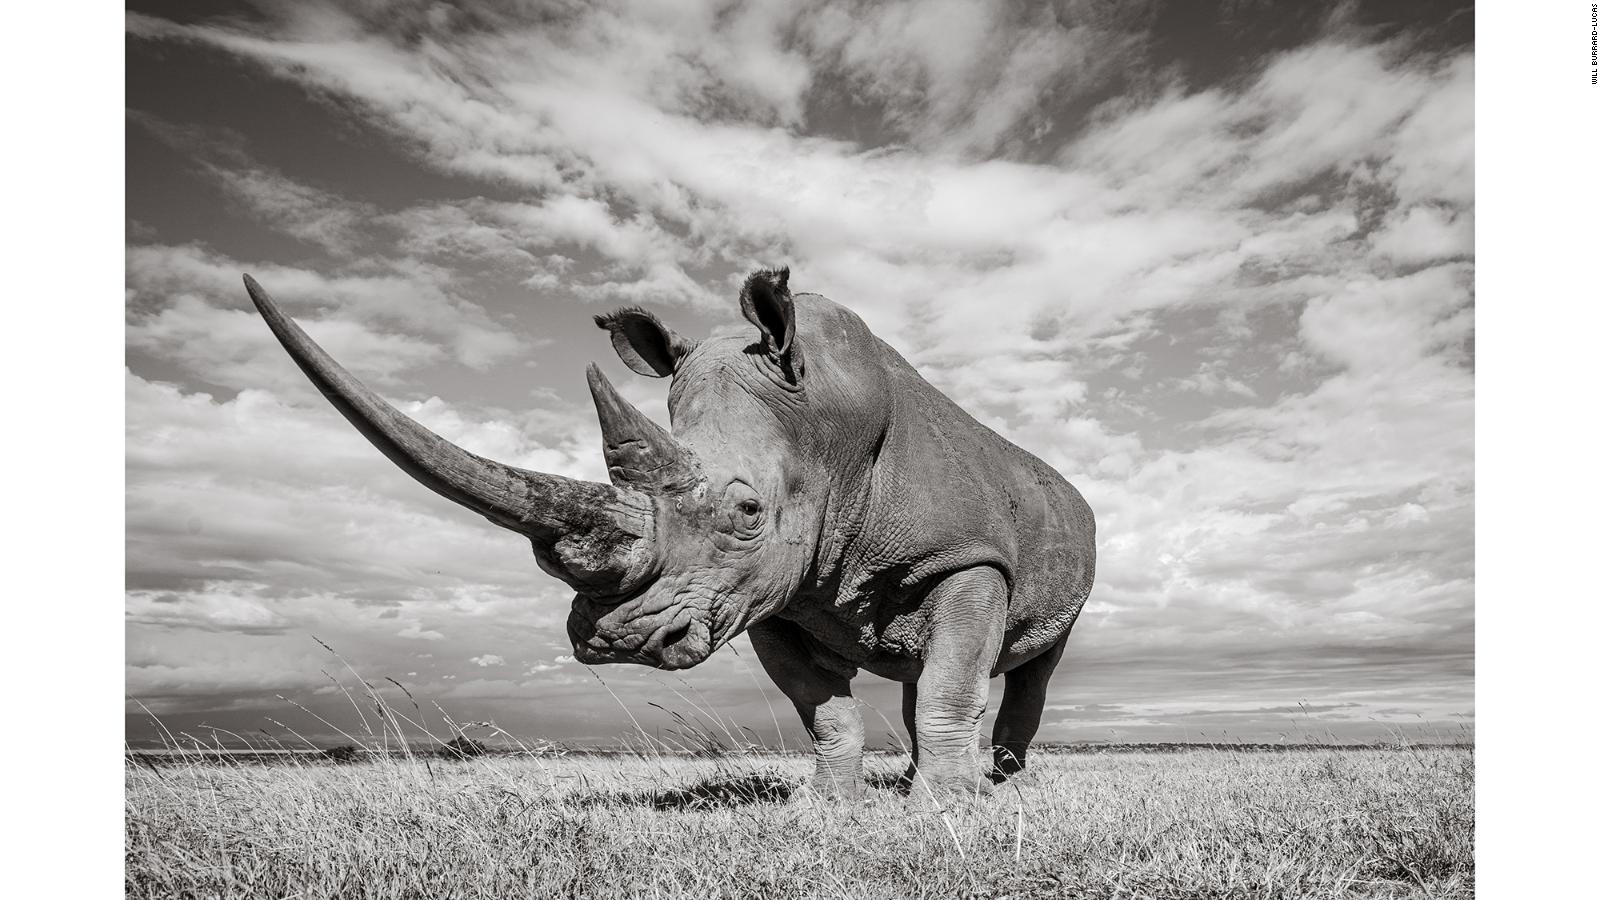 Endangered rhinos: View incredible picture from Kenya